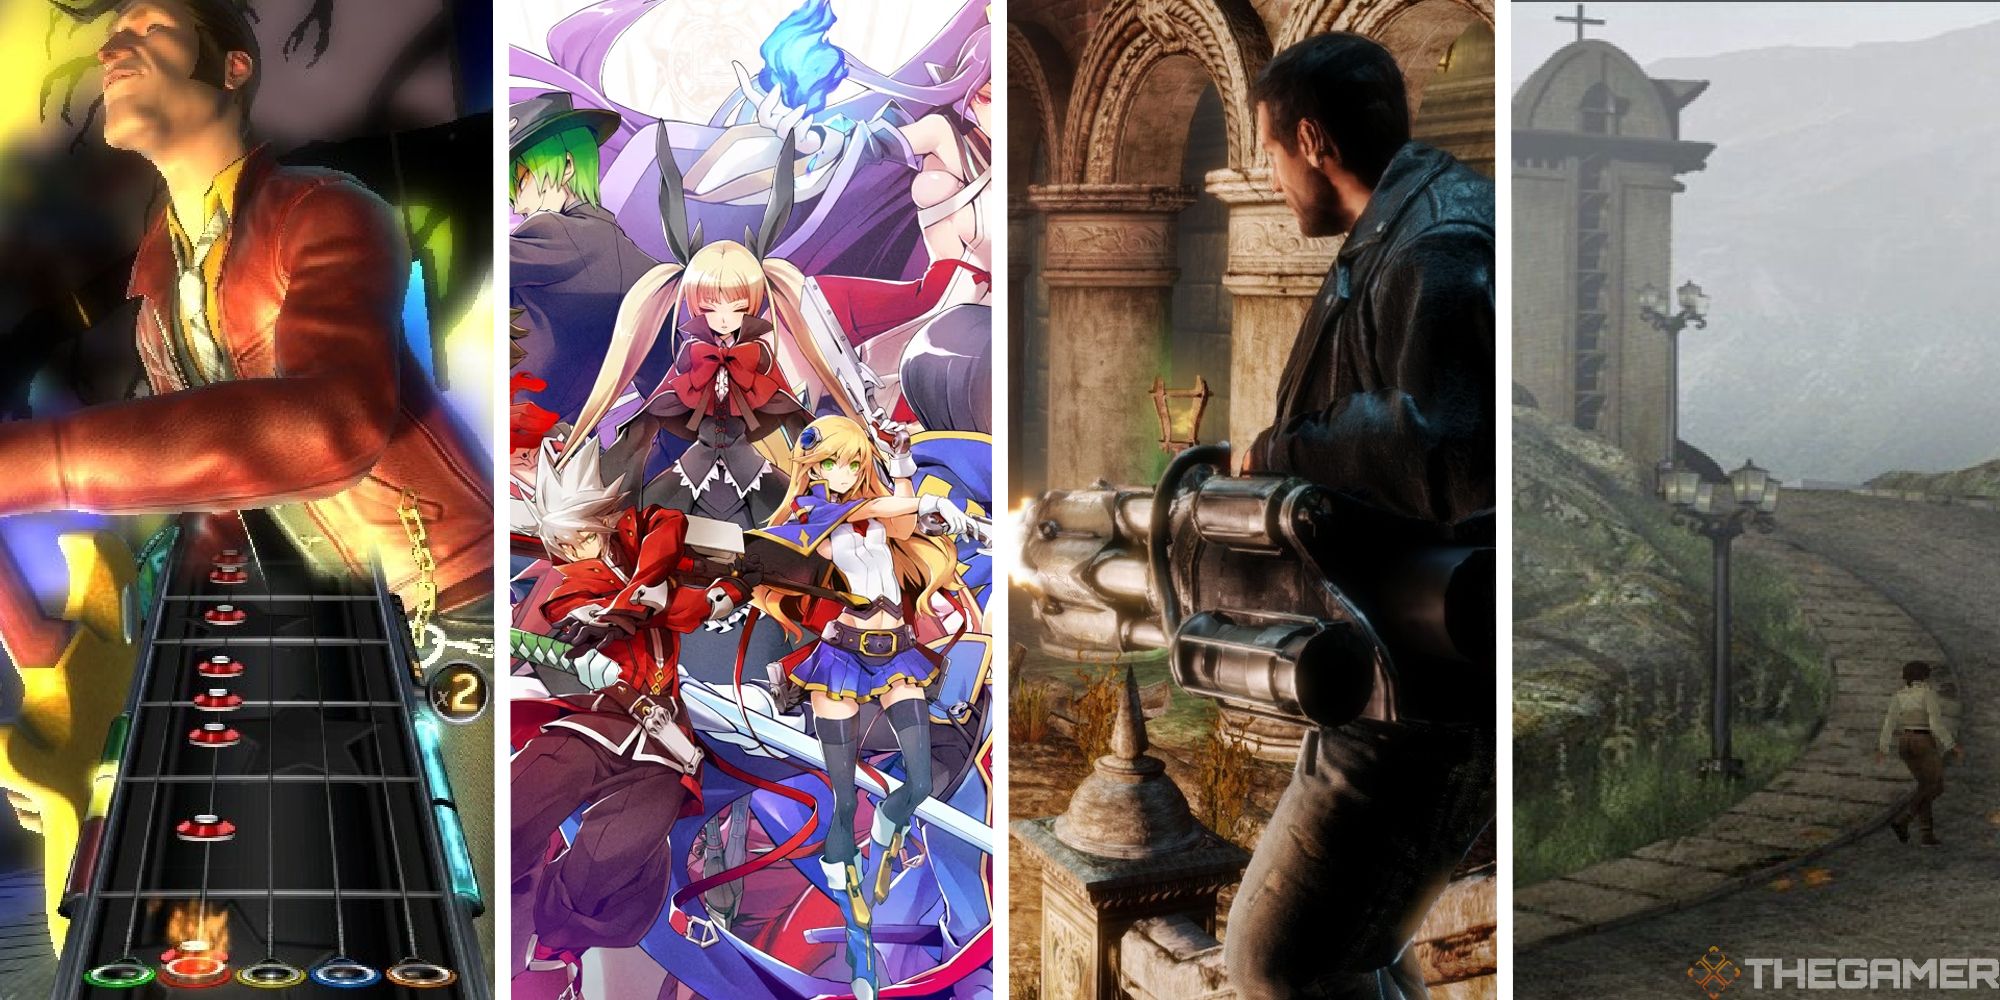 split image showing band hero, blazblue cross fiction, painkiller, and syberia